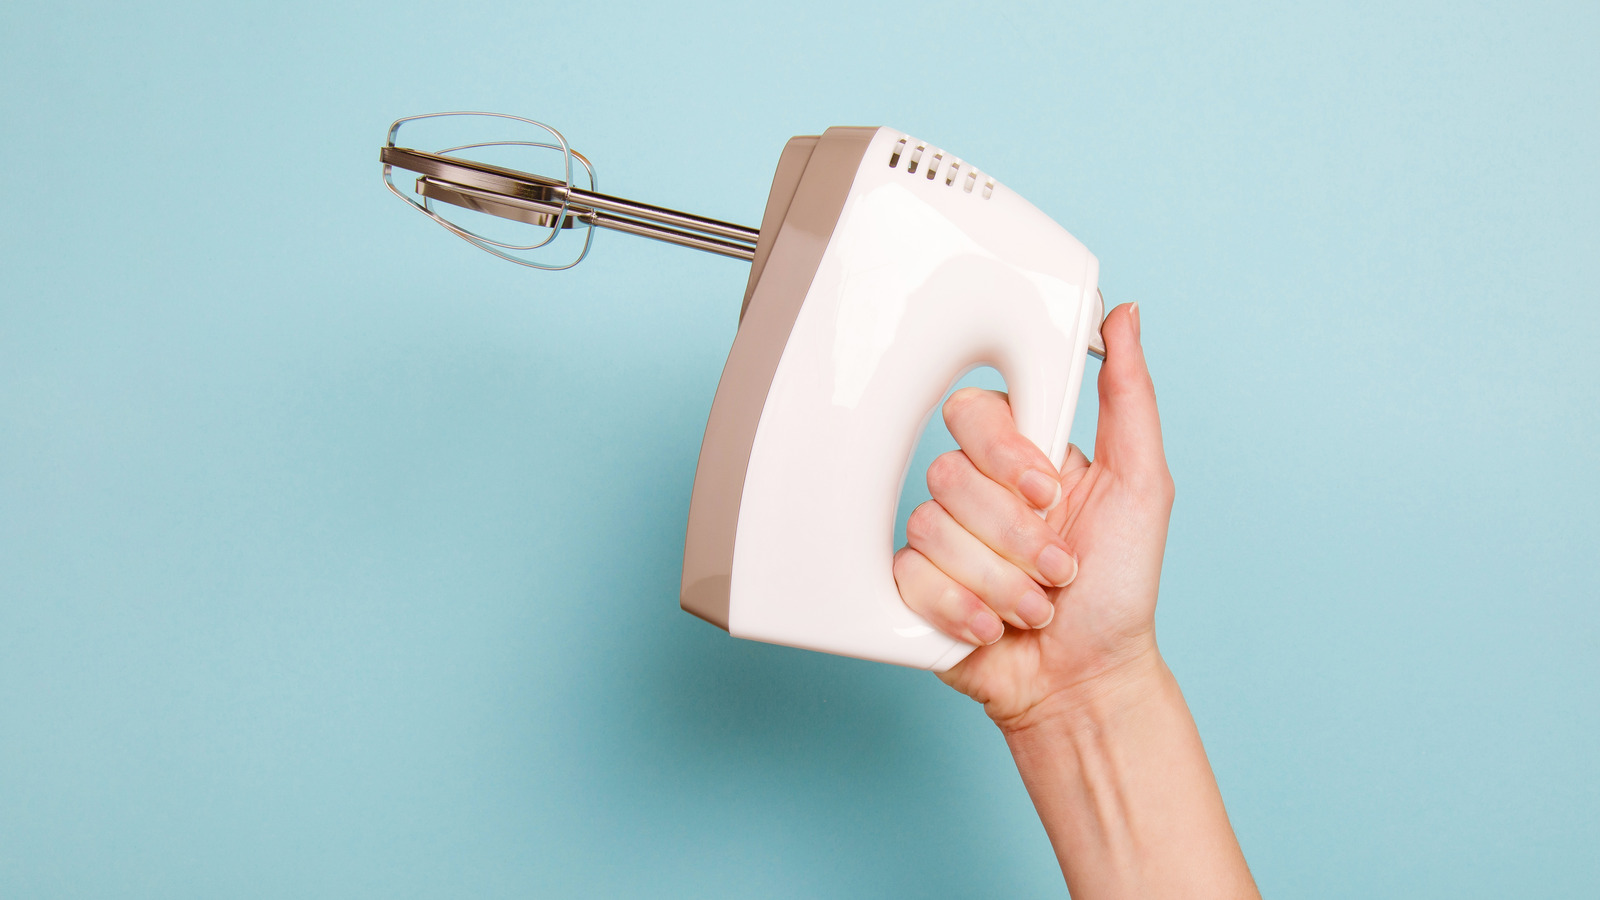 Here's Your Hand Mixer Buying Guide